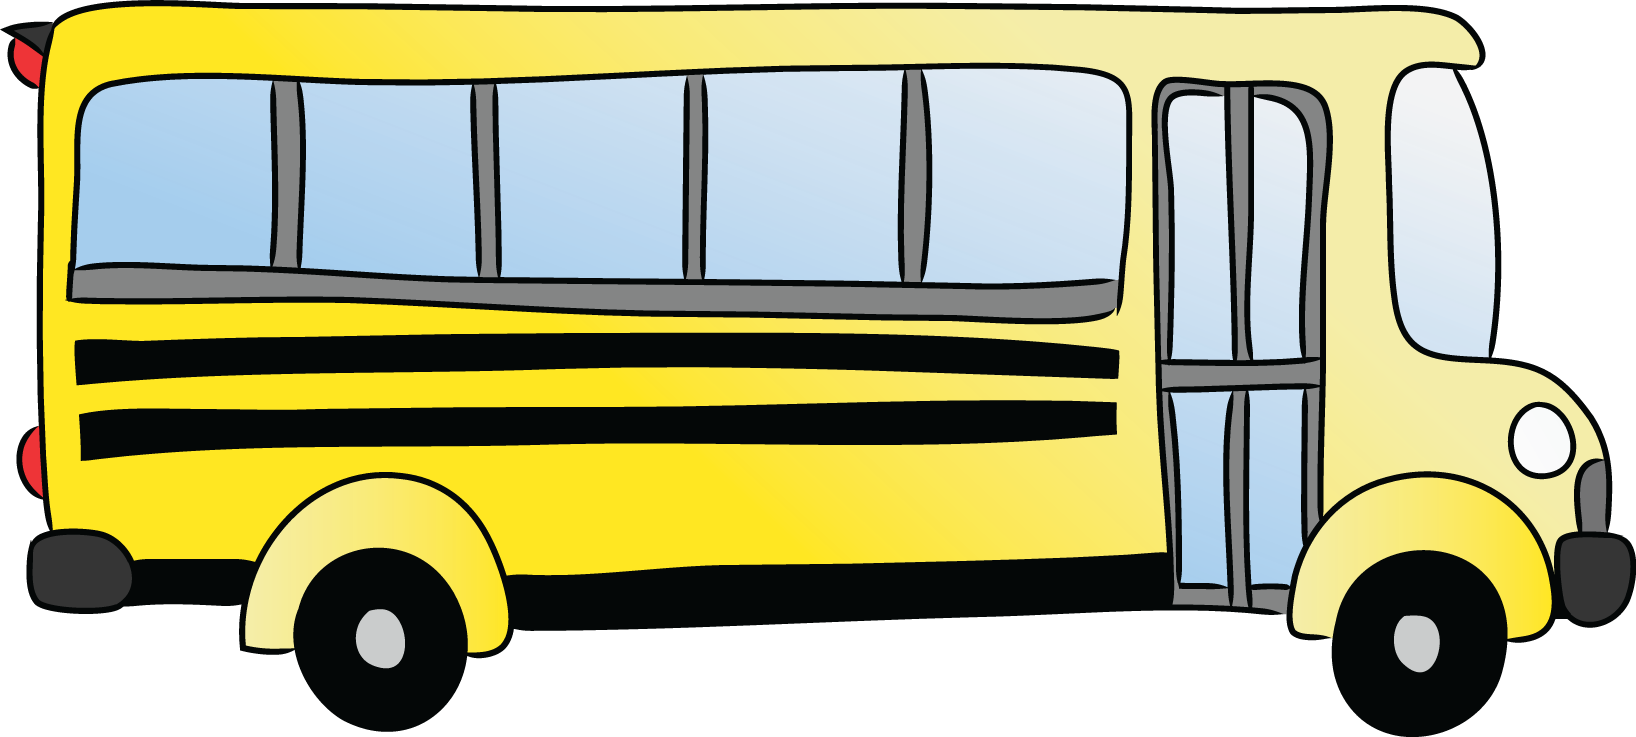 free clipart of school buses - photo #17